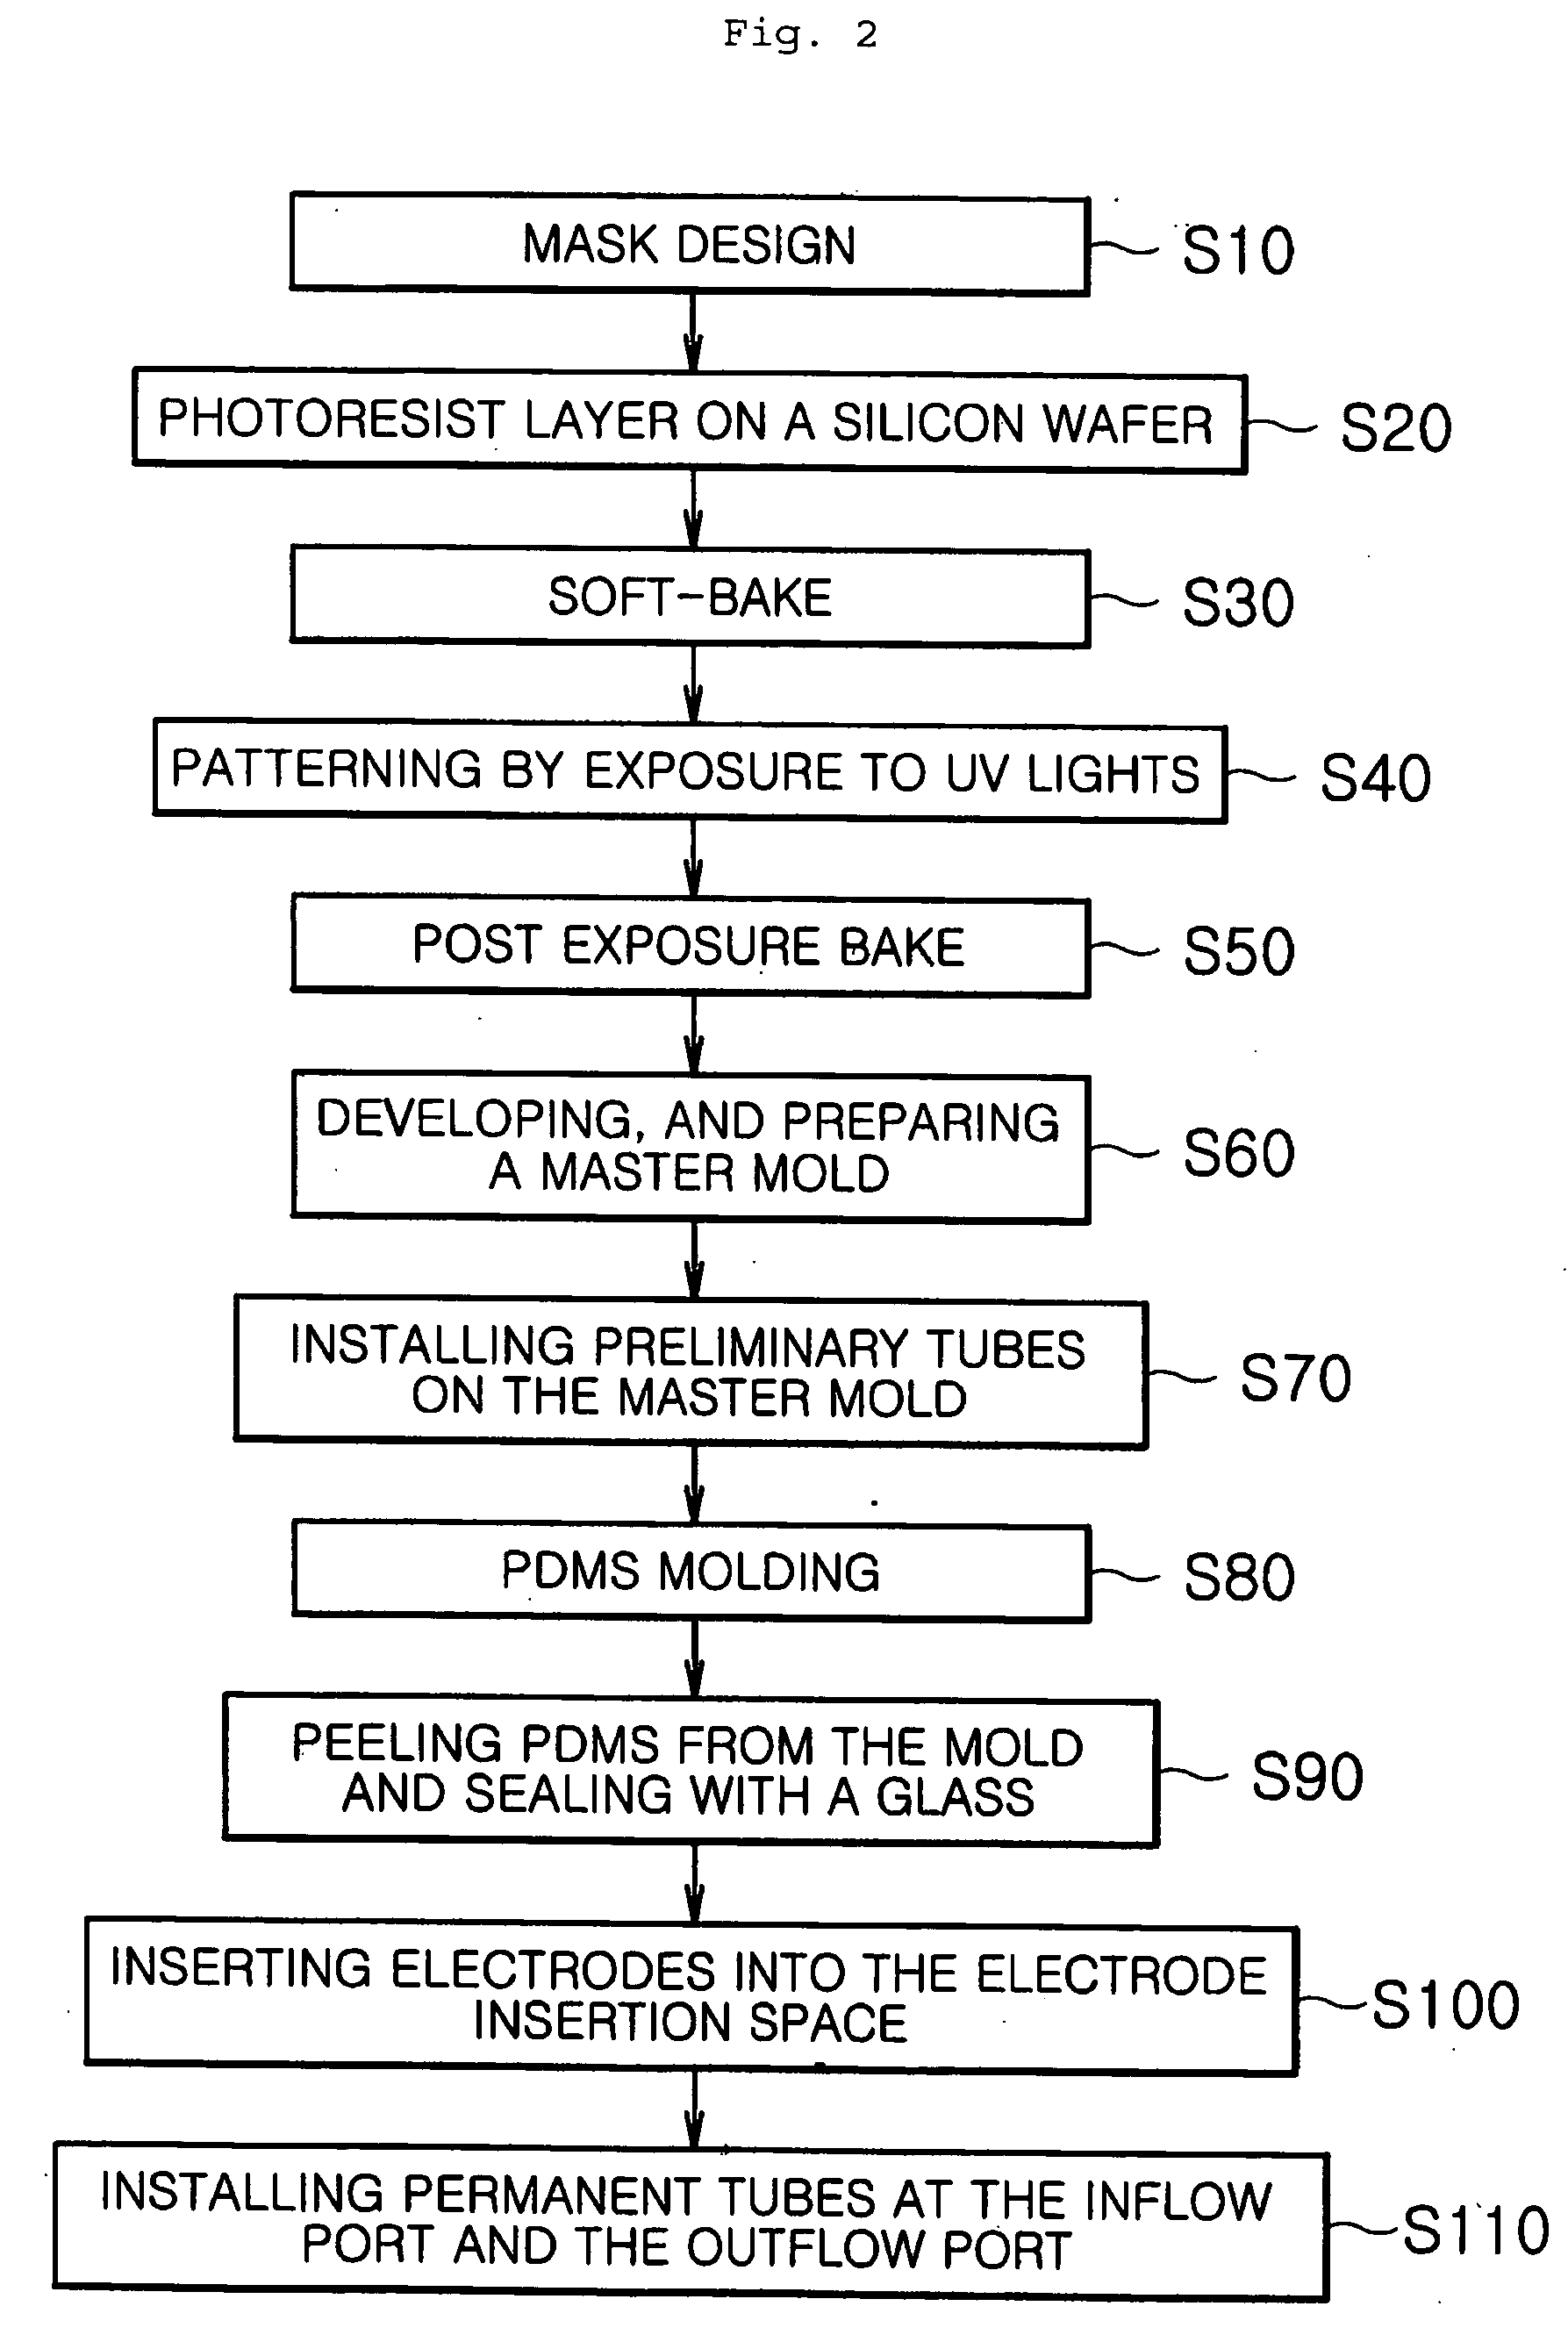 Electrokinetic micro power cell using microfluidic-chip with multi-channel type